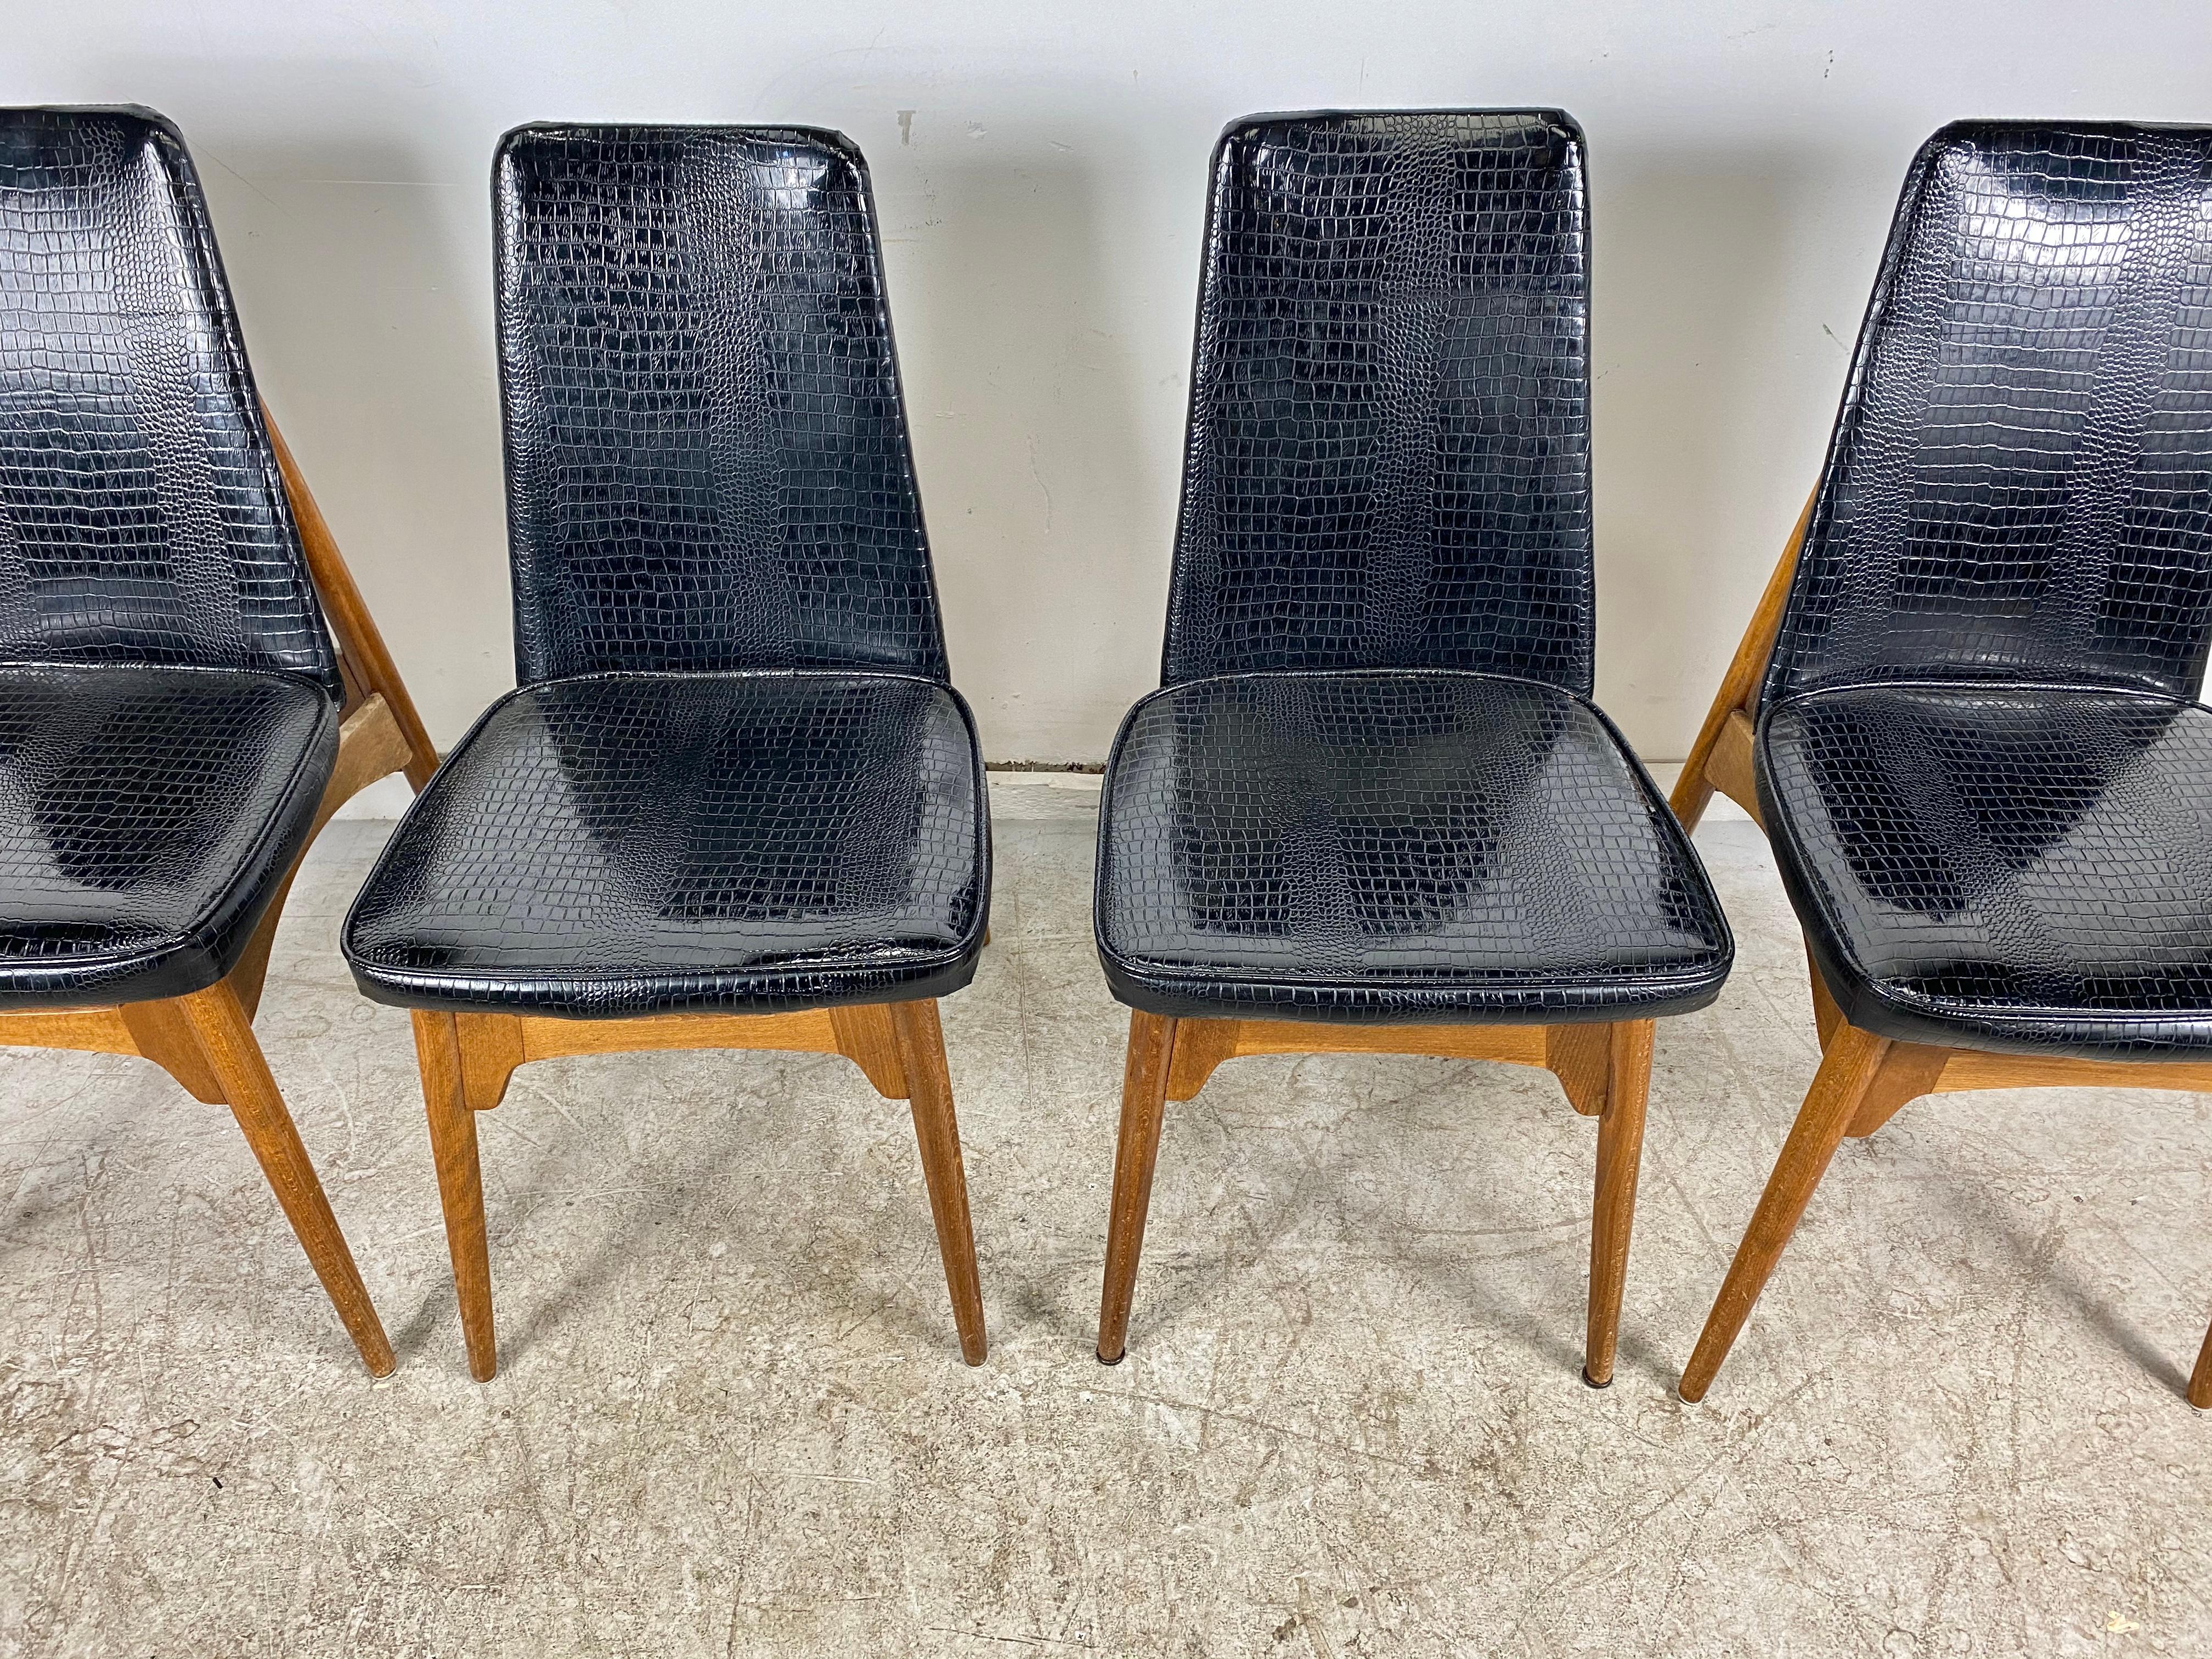 Set Four Mid-Century Modern Dining Chairs, Original Alligator Patent Leather For Sale 1